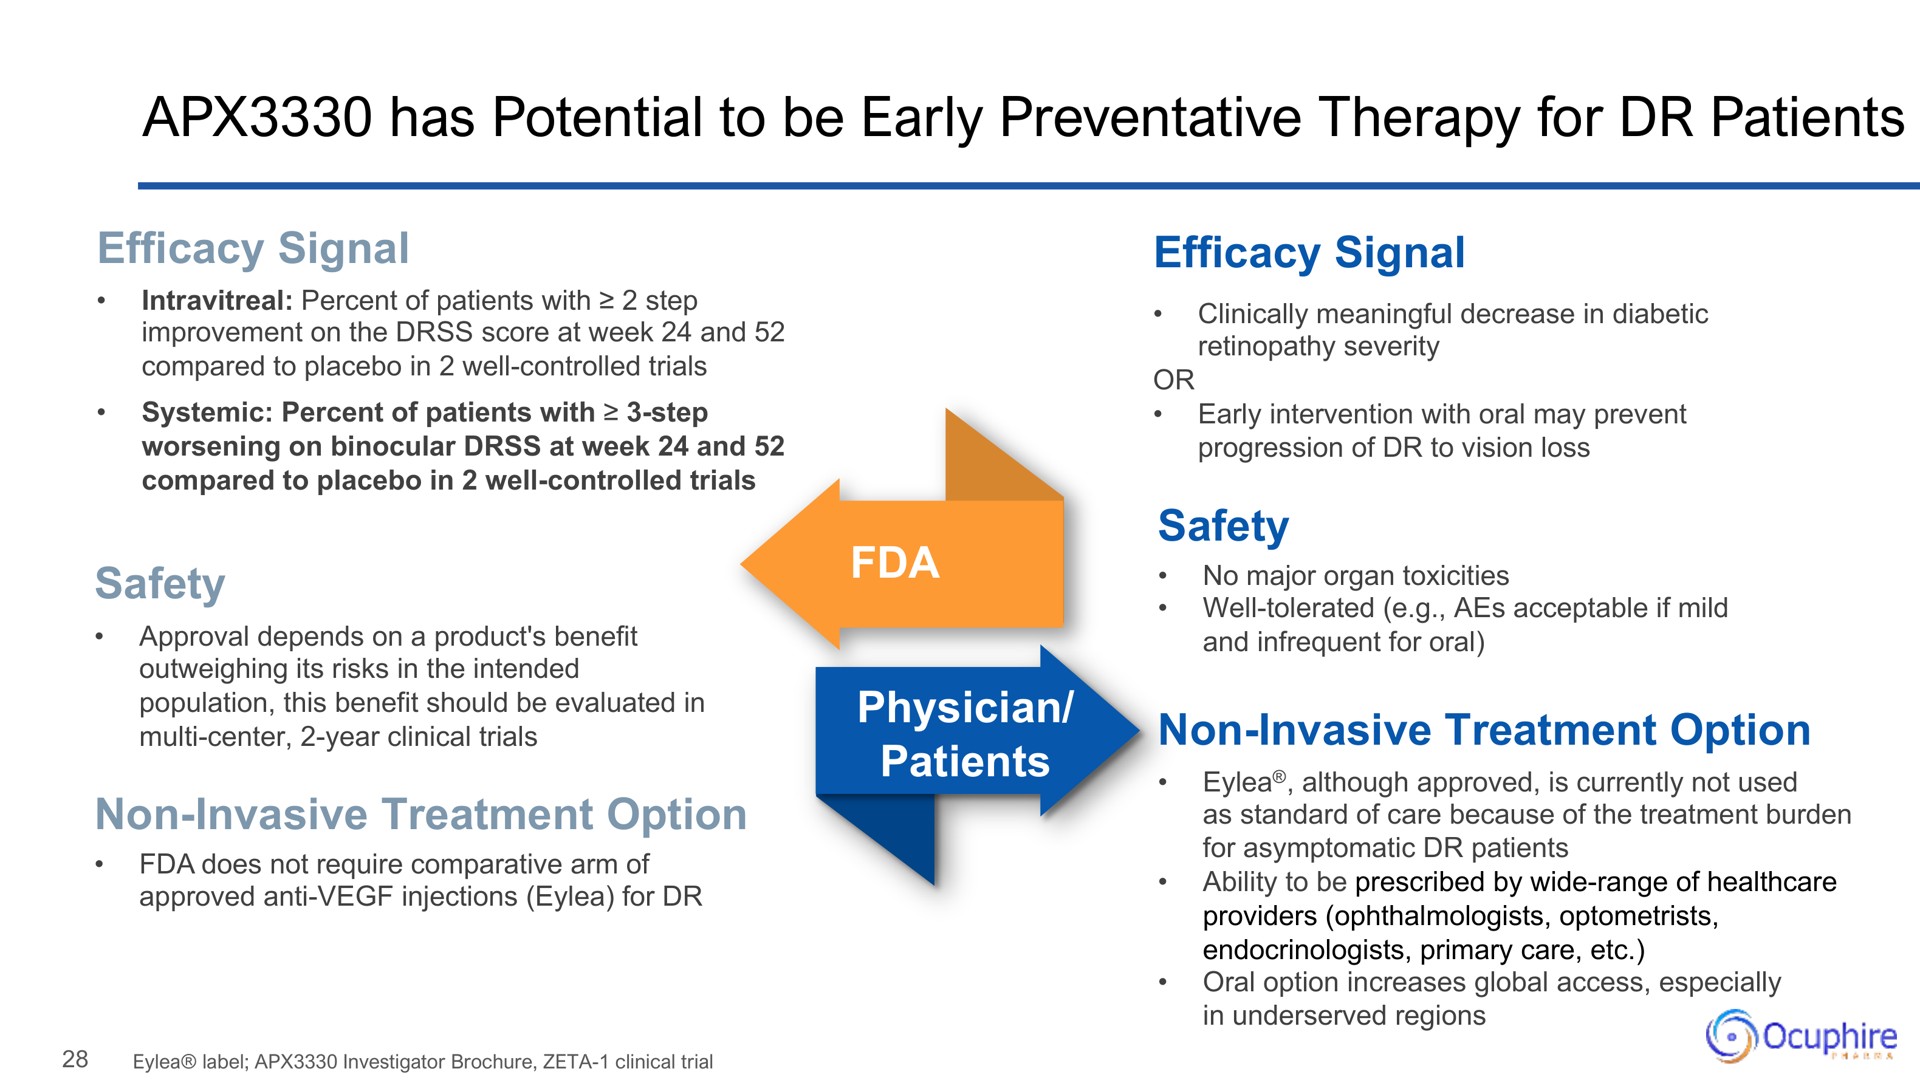 has potential to be early preventative therapy for patients | Ocuphire Pharma